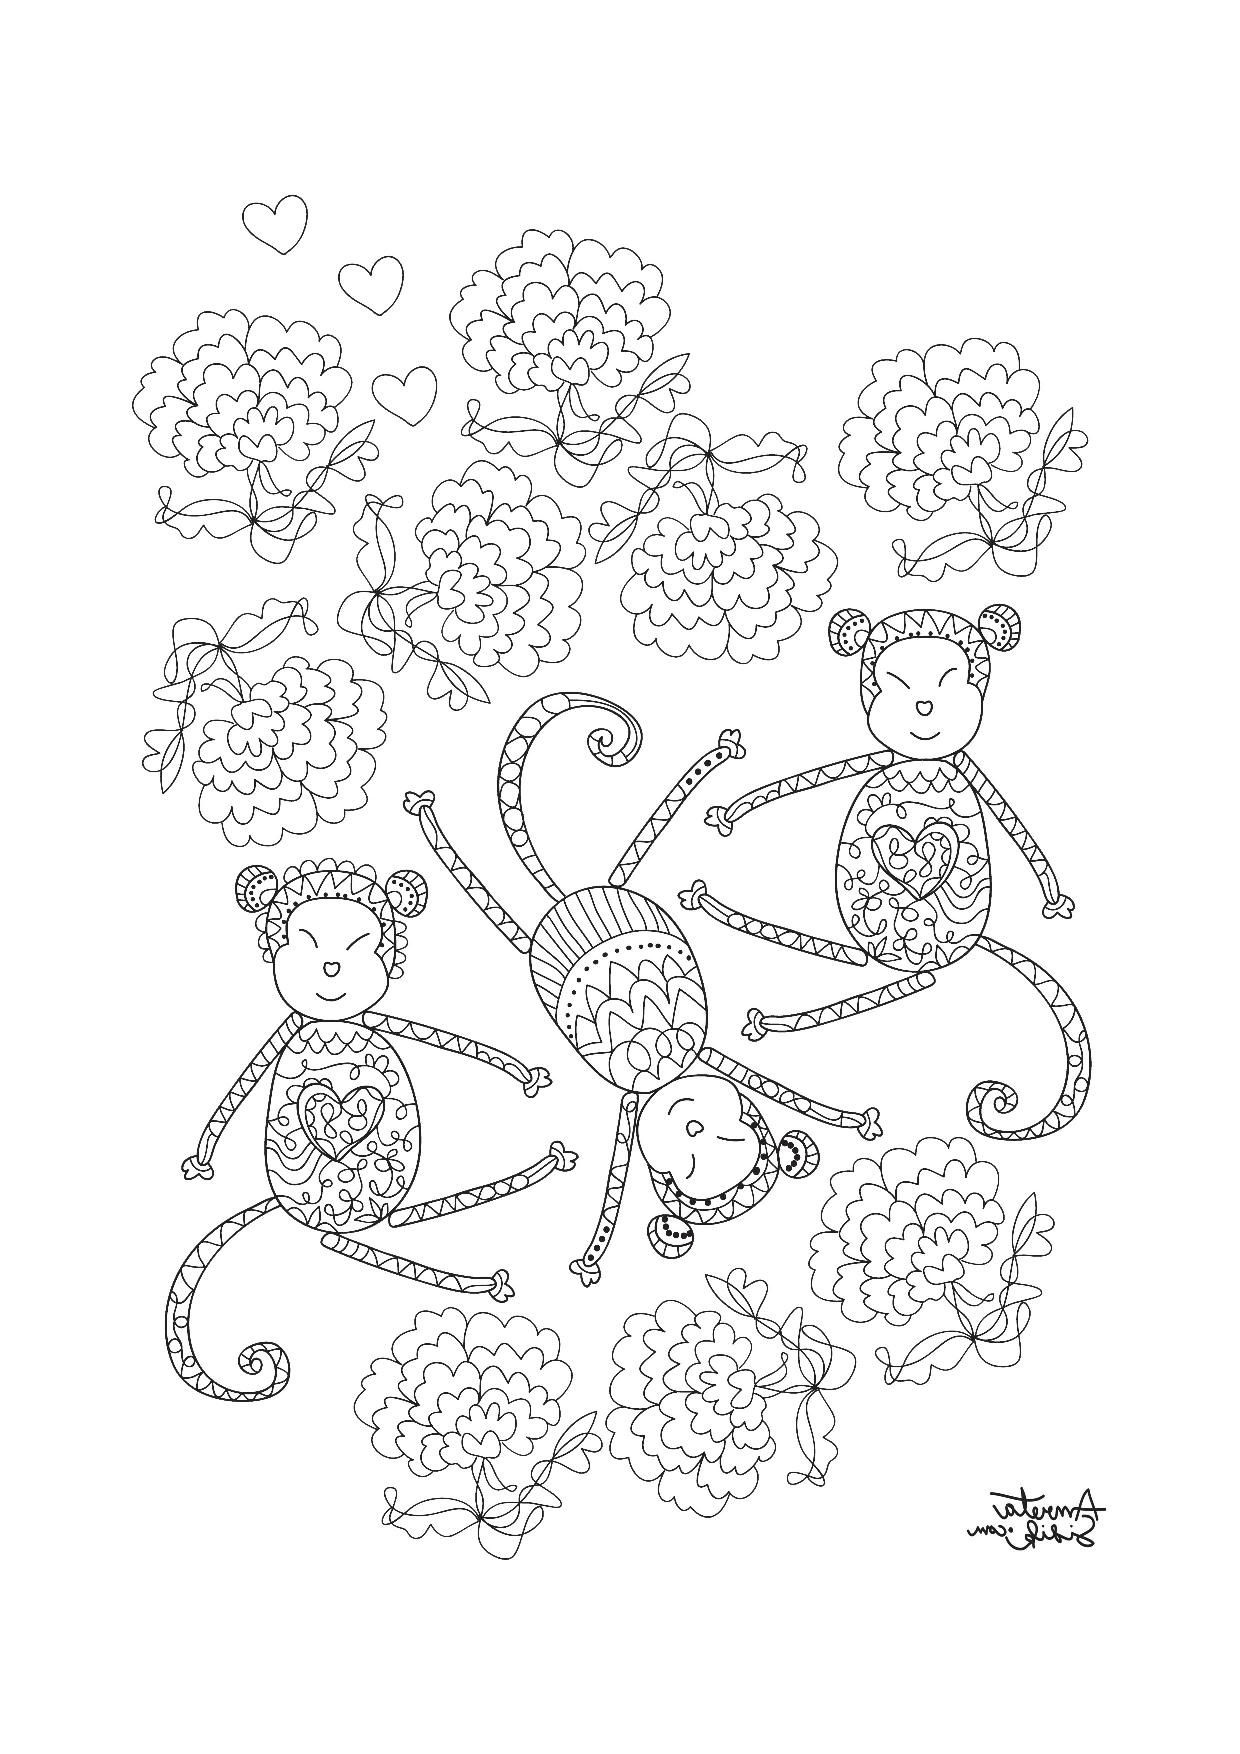 Coloriage Pour Adulte Animaux Cool Photographie Coloring Adult Year Of the Monkey 2 From the Gallery